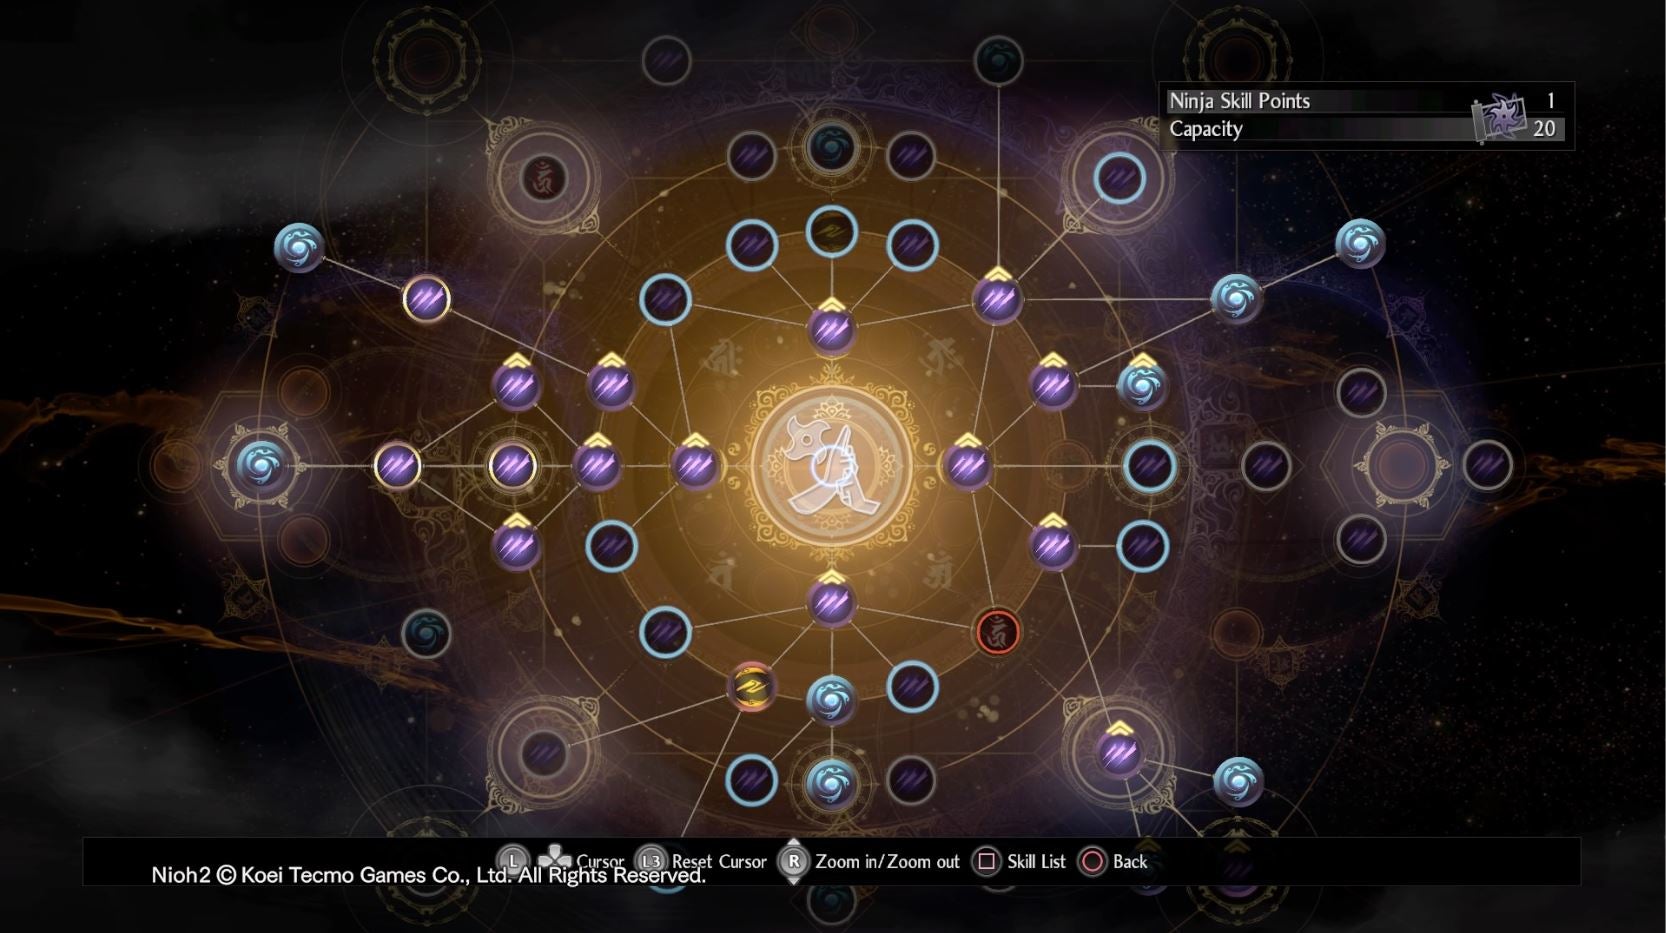 Image for Nioh 2 Best Skills - How to get your first Ninja and Onmyo Magic skill points